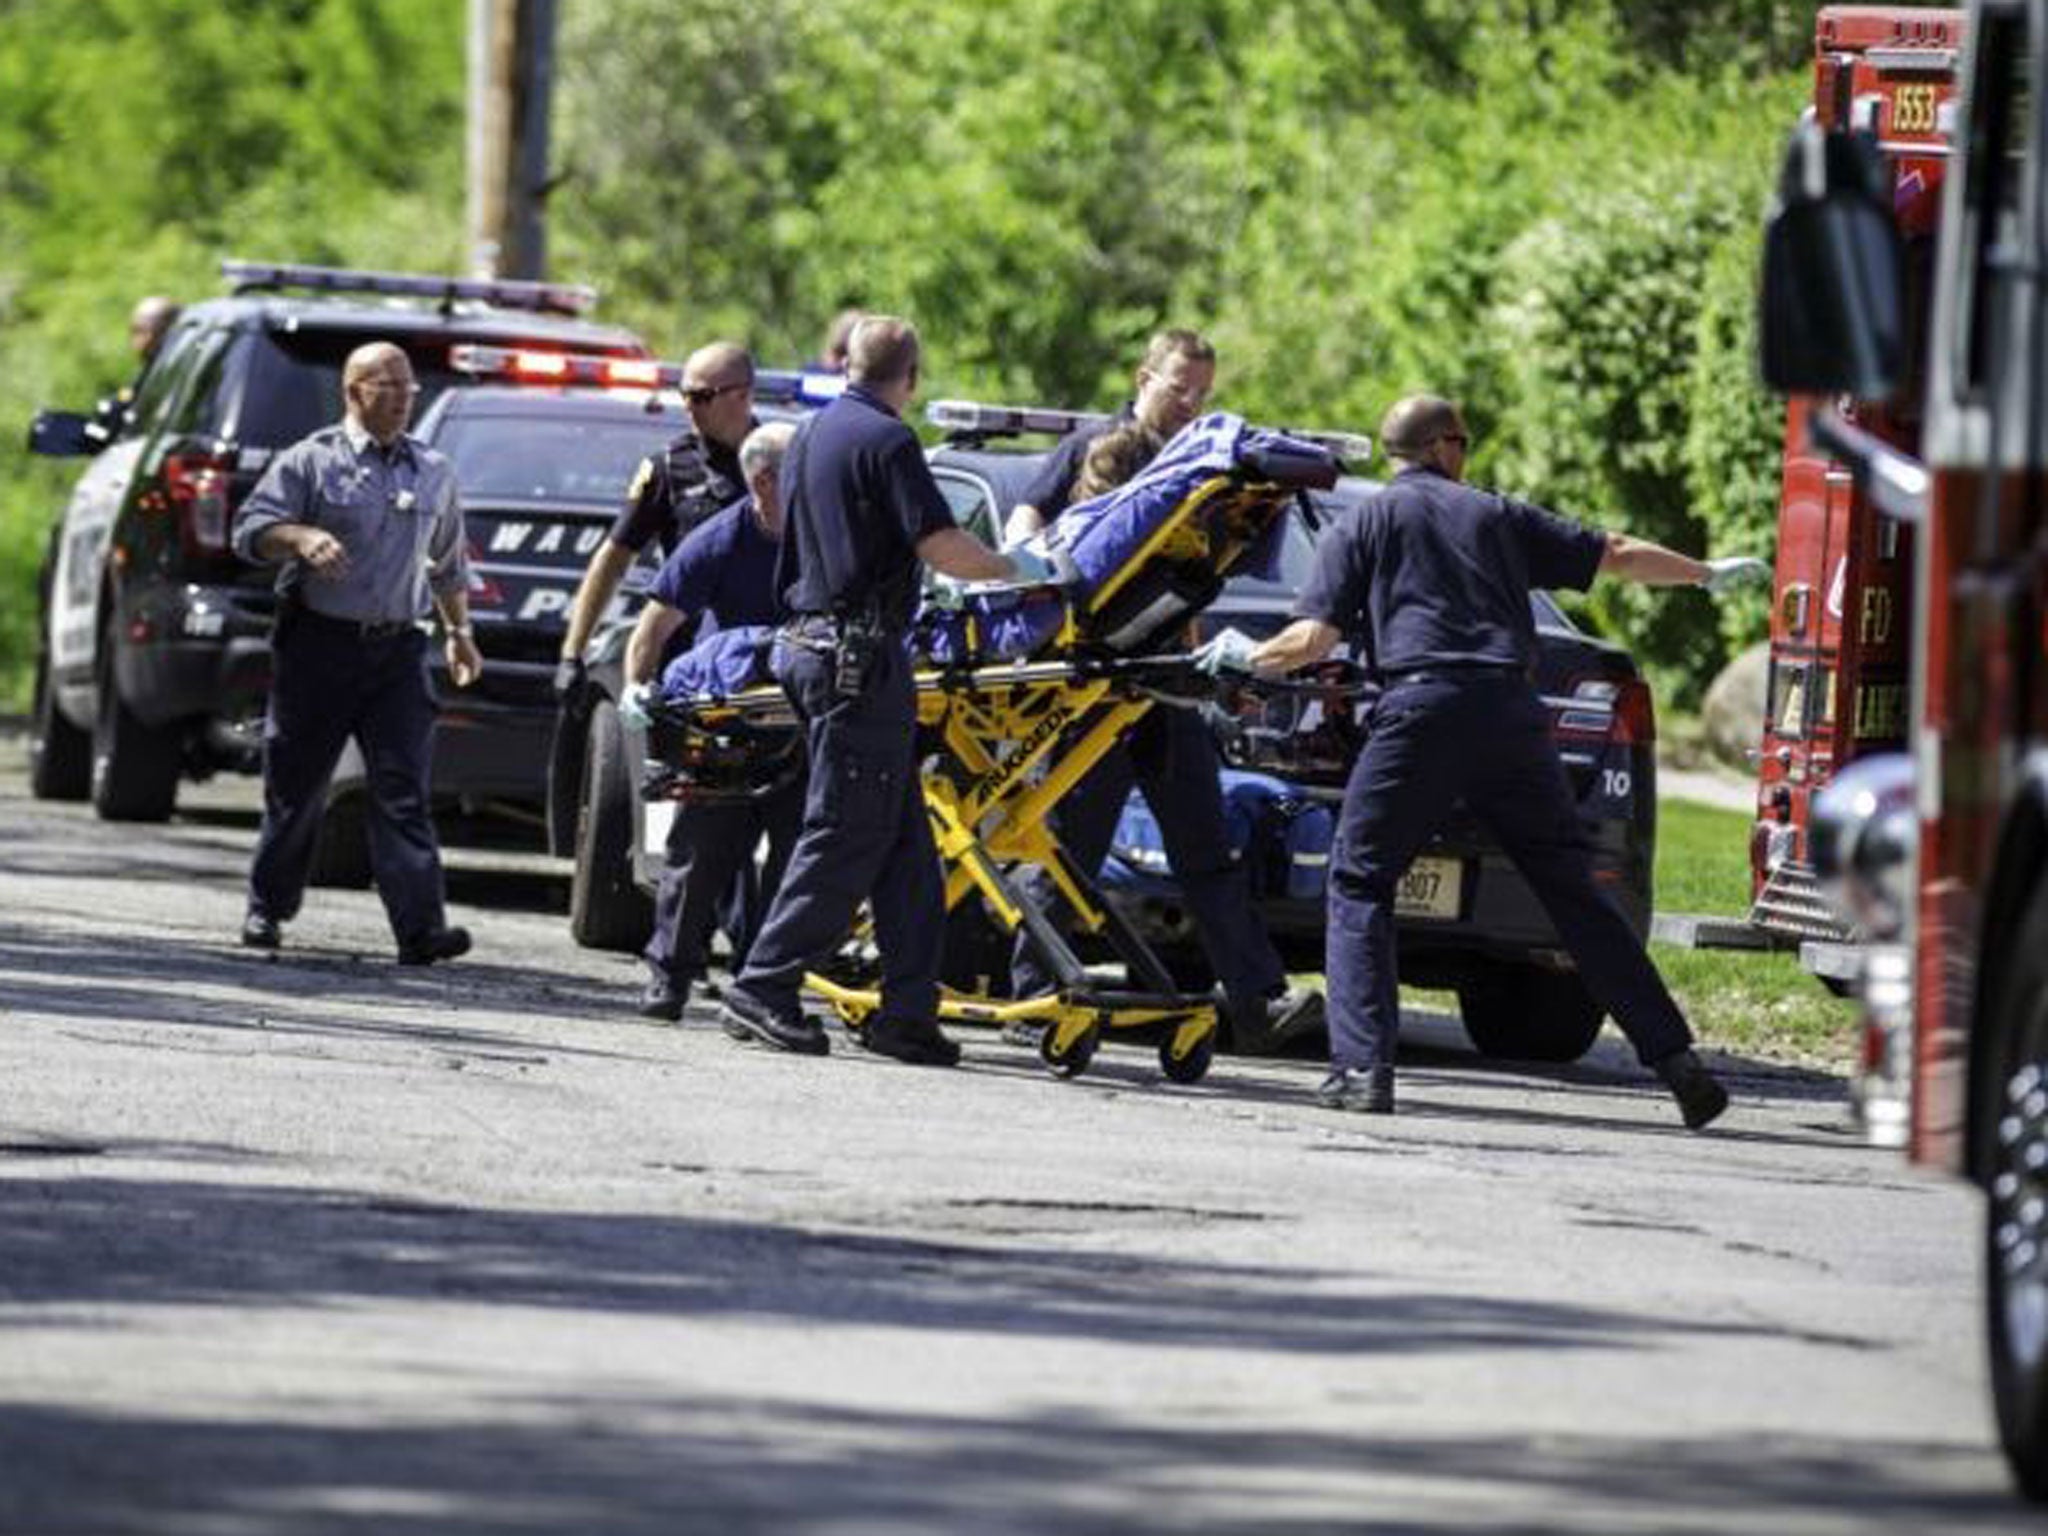 Rescue workers take a stabbing victim to the ambulance in Waukesha, Wis. Prosecutors say two 12-year-old southeastern Wisconsin girls stabbed their 12-year-old friend nearly to death in the woods to please a mythological creature they learned about online